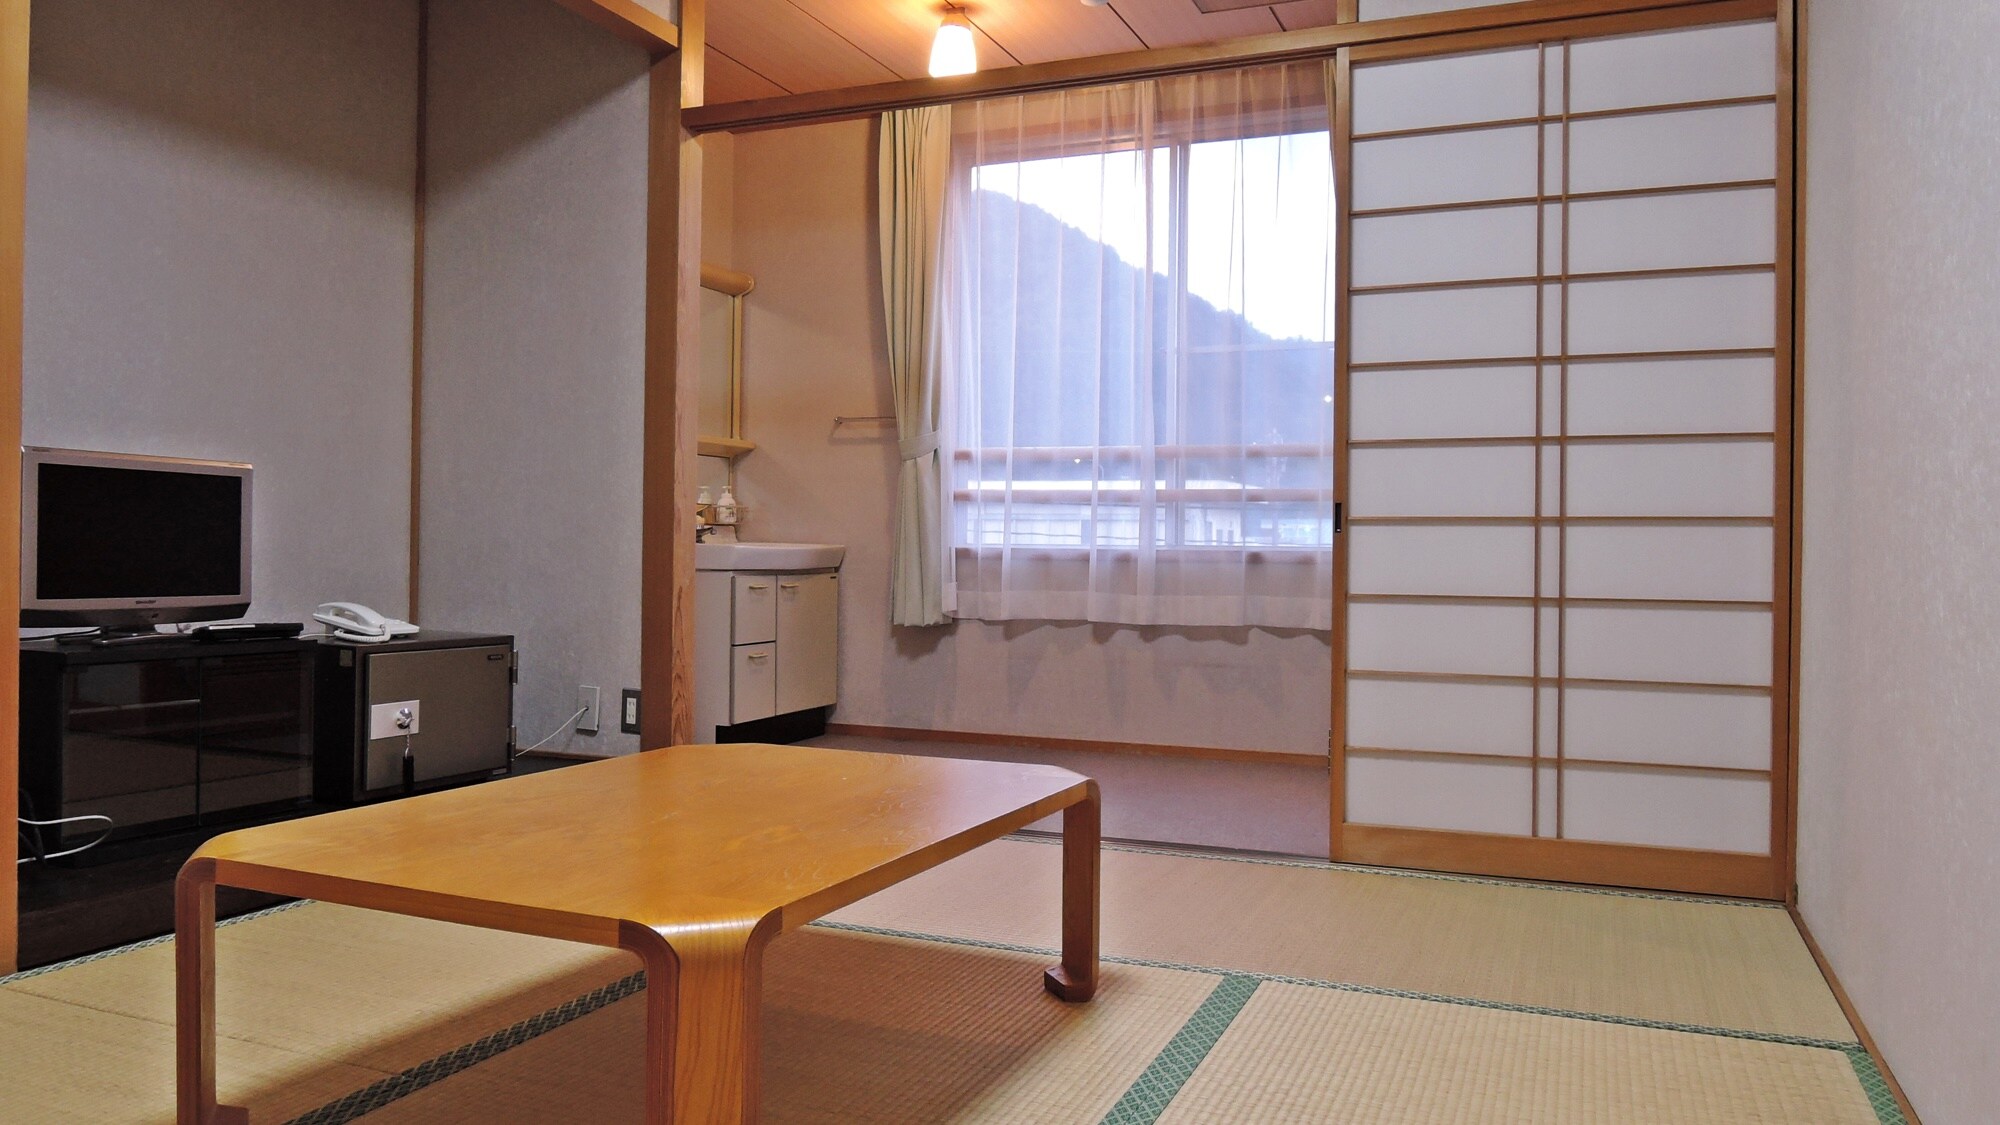 * [Room] This is an example of a Japanese-style room. Please relax and relax.